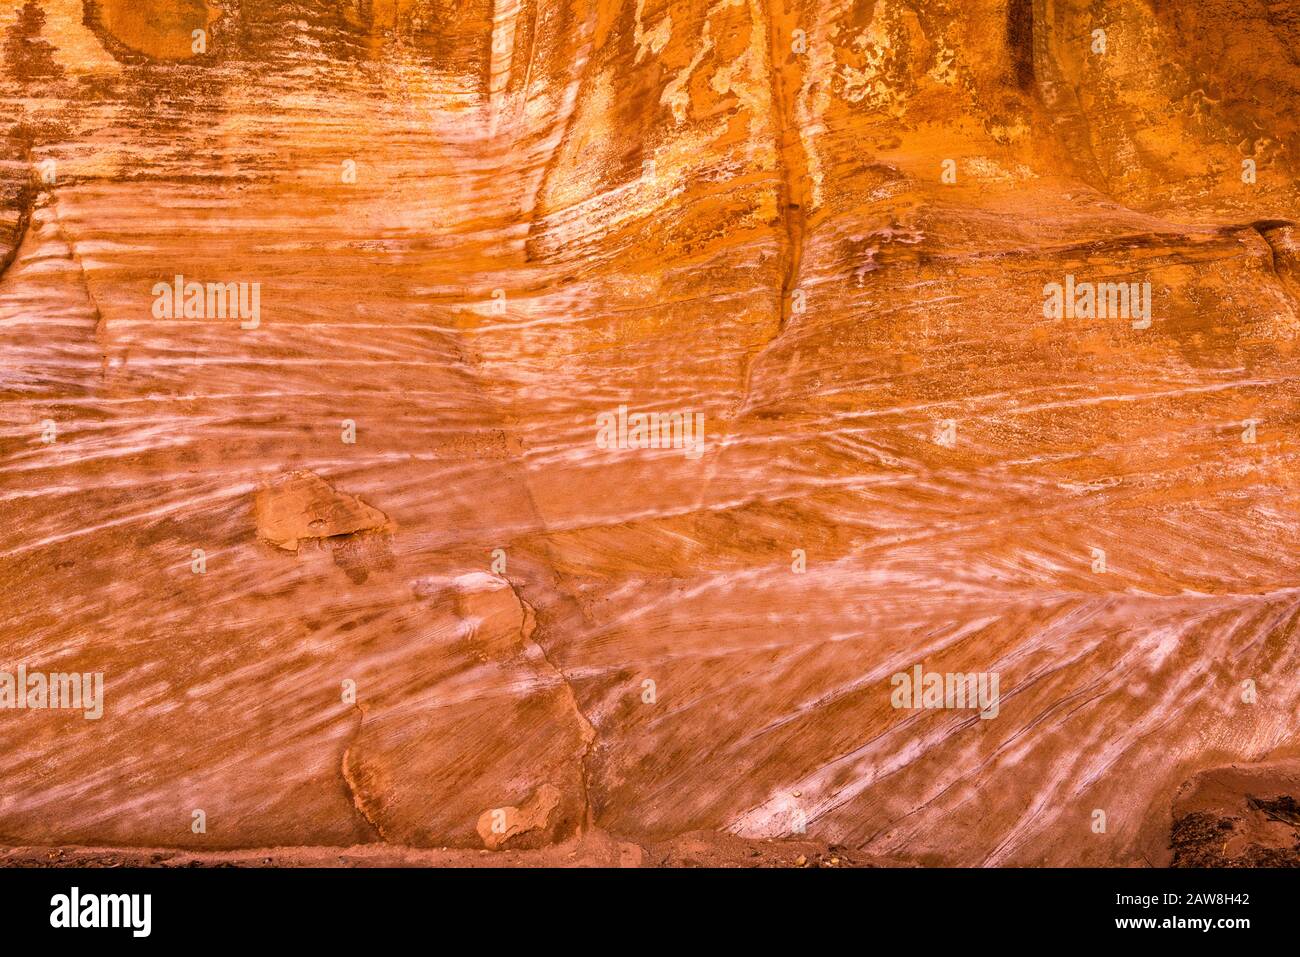 Crossbedding at cliff wall at Capitol Gorge, canyon in Capitol Reef National Park, Colorado Plateau, Utah, USA Stock Photo